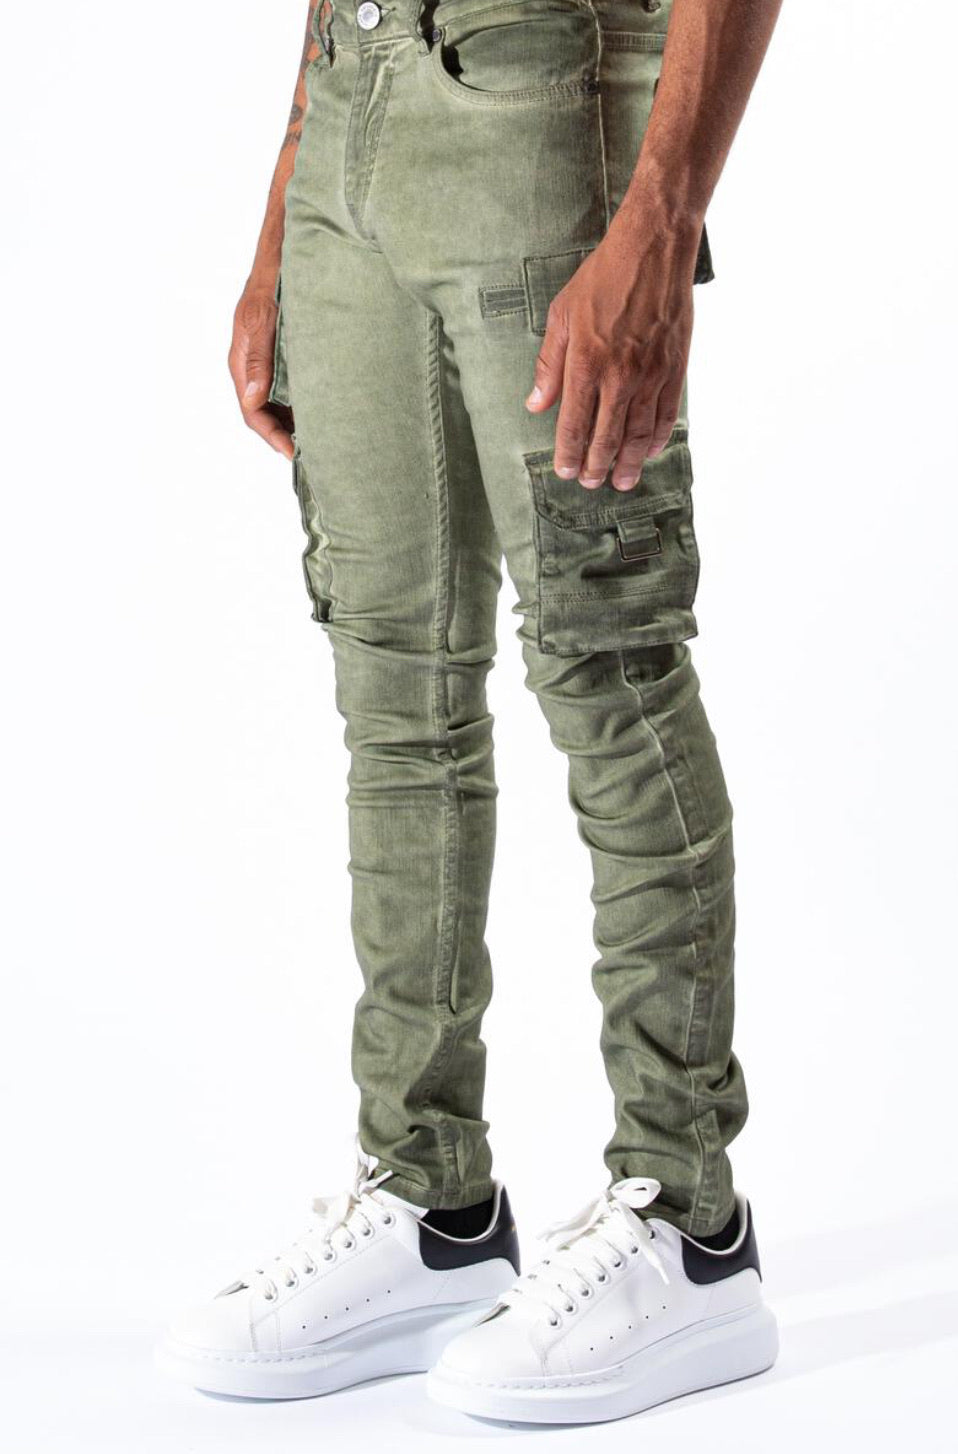 Serenede-Olea Cargo Jeans-Olive